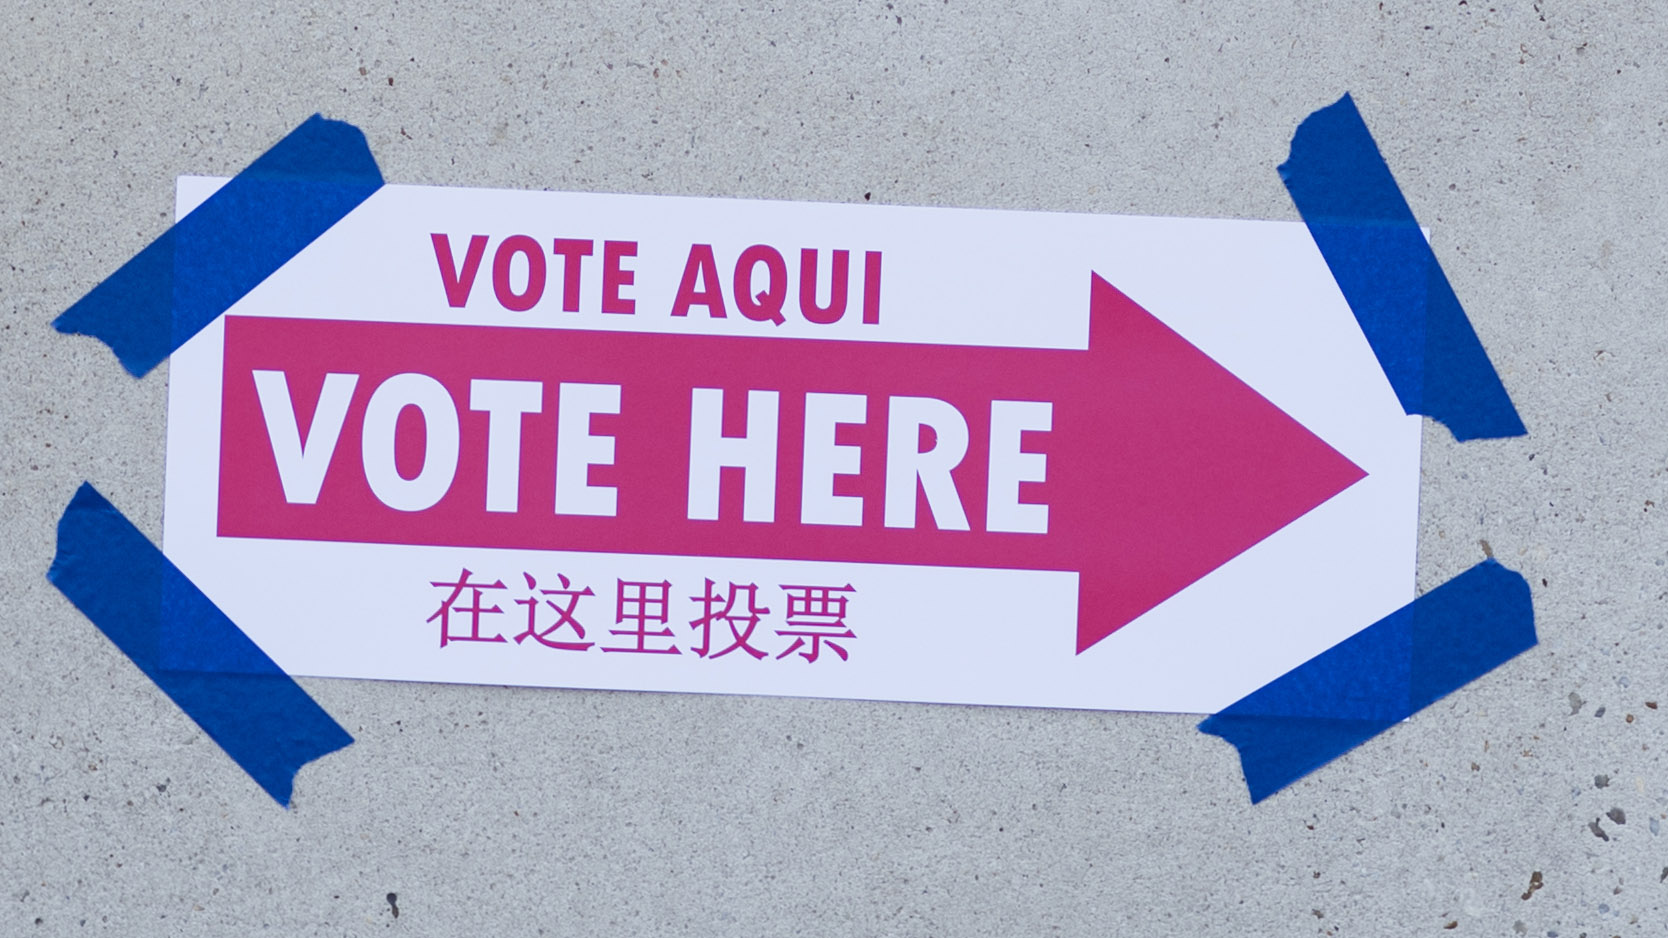 Voting signs are posted at the early voting polls at One Judiciary Square in Washington on June 10, 2016.
